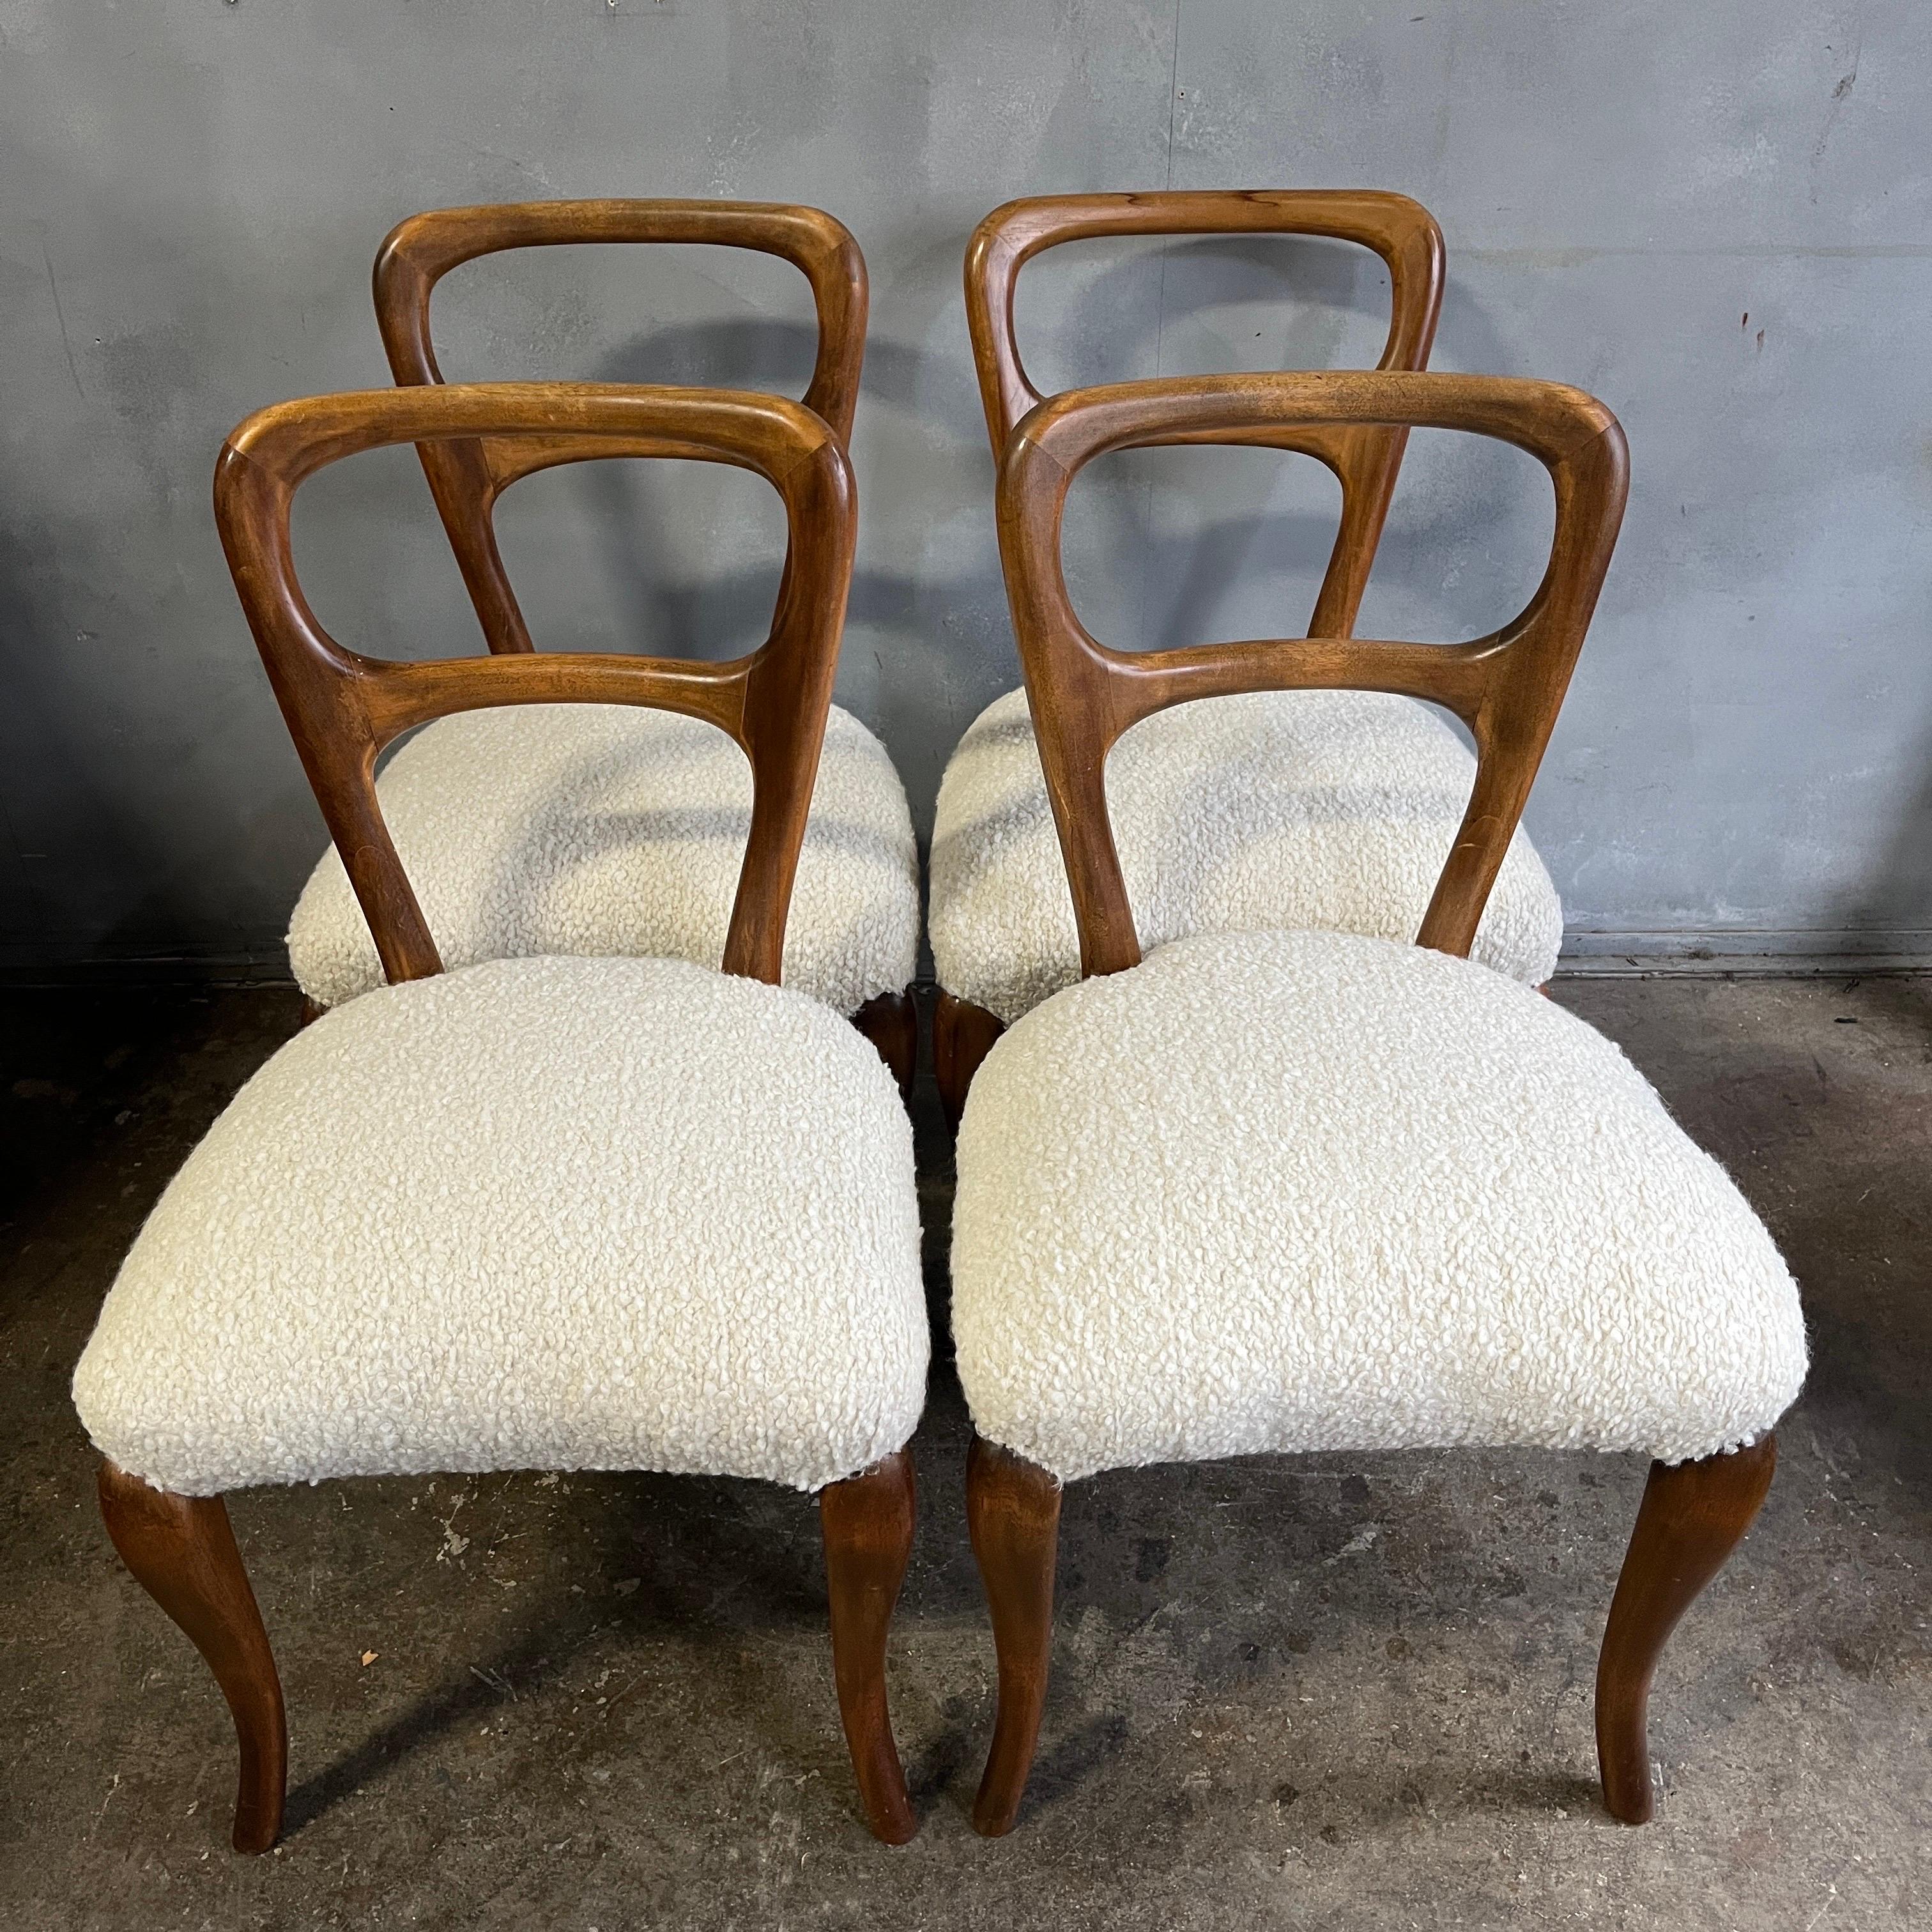 Exceptional Midcentury Dining Chairs Jean Royère Style 1